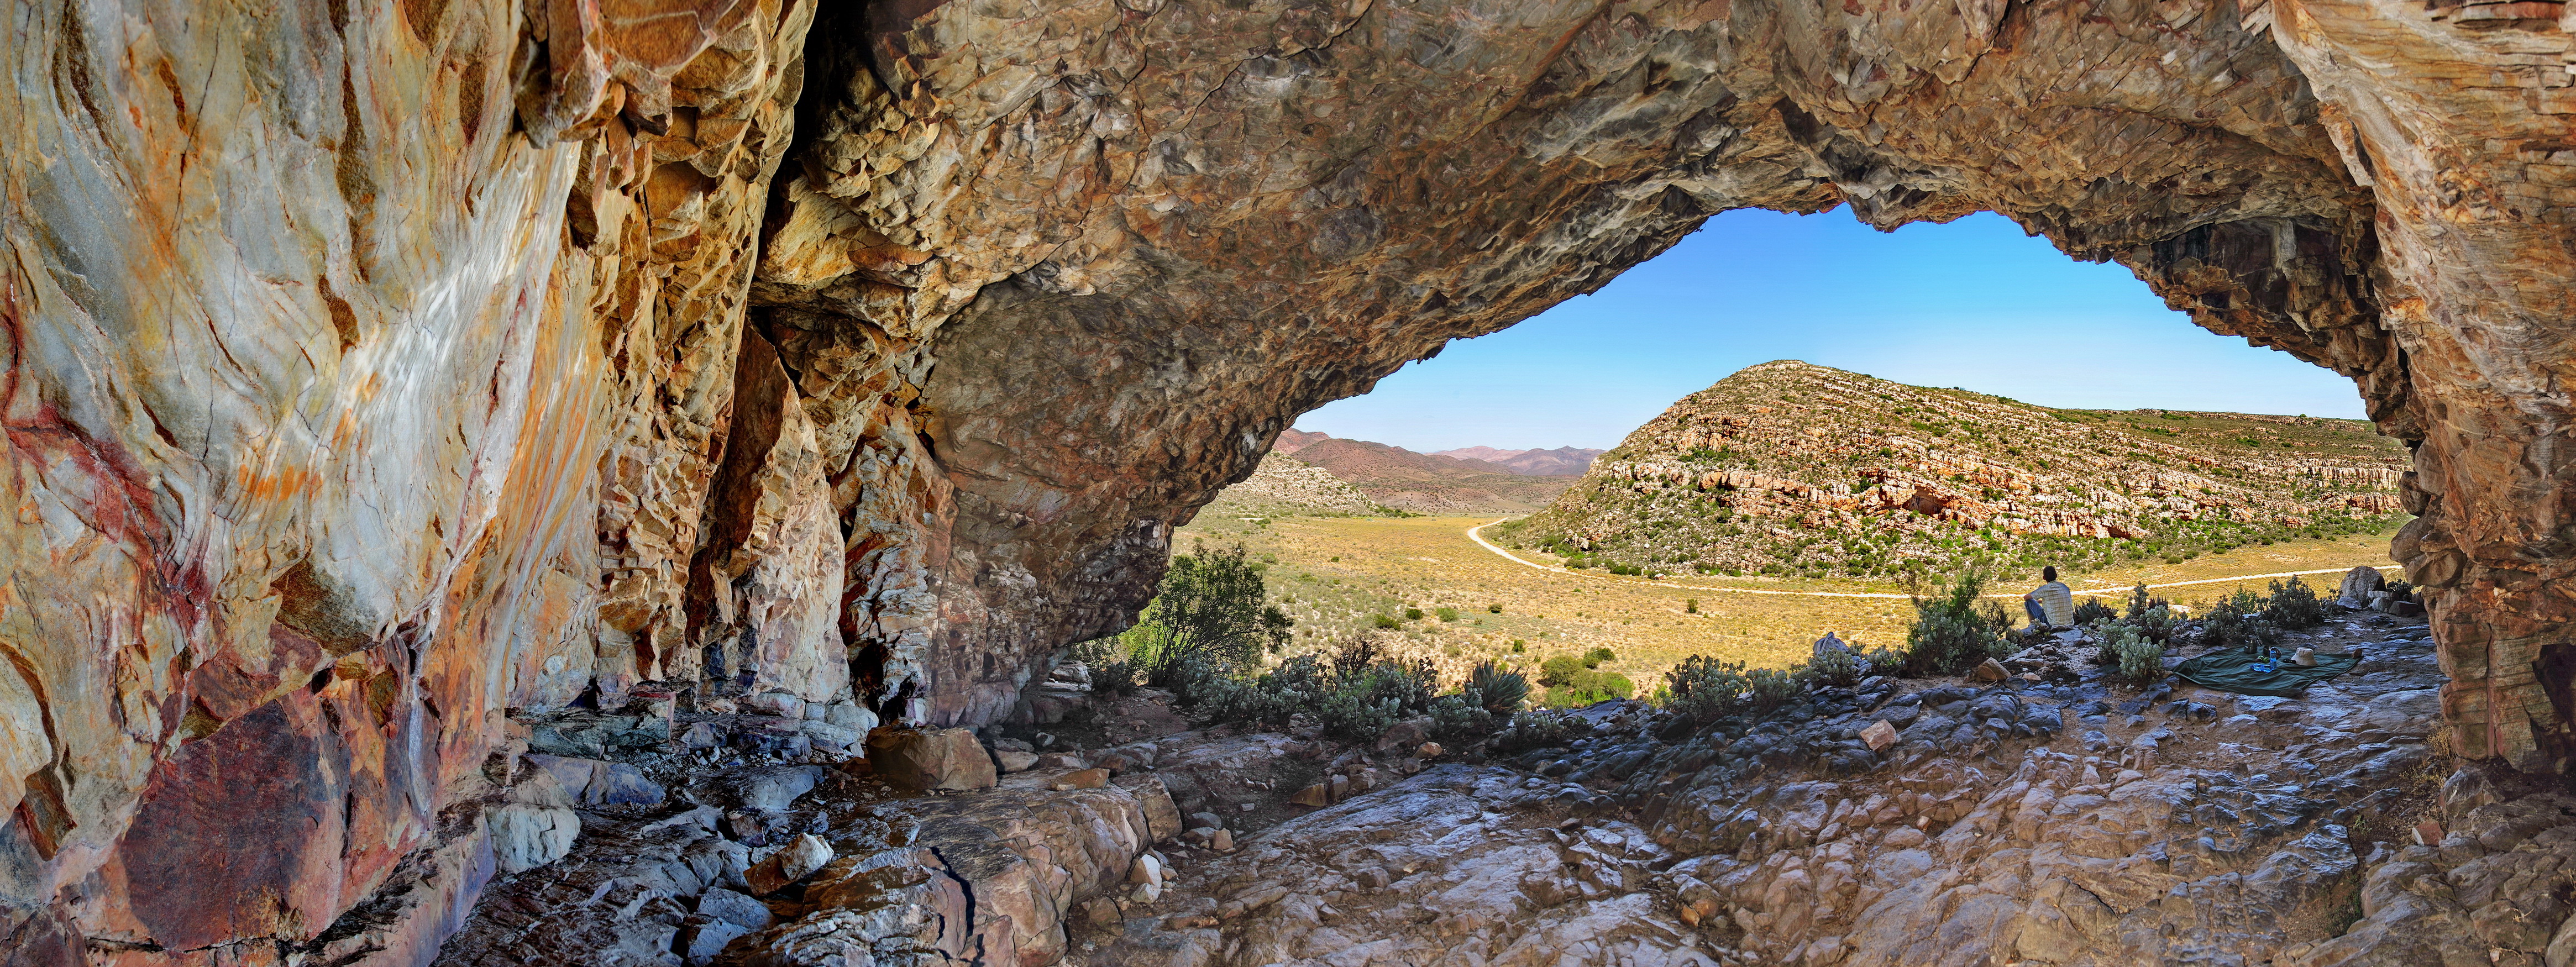 Rock paintings in the Sanbona Wildlife Reserve.  Barrydale.  western cape  South Africa.  Image: Included